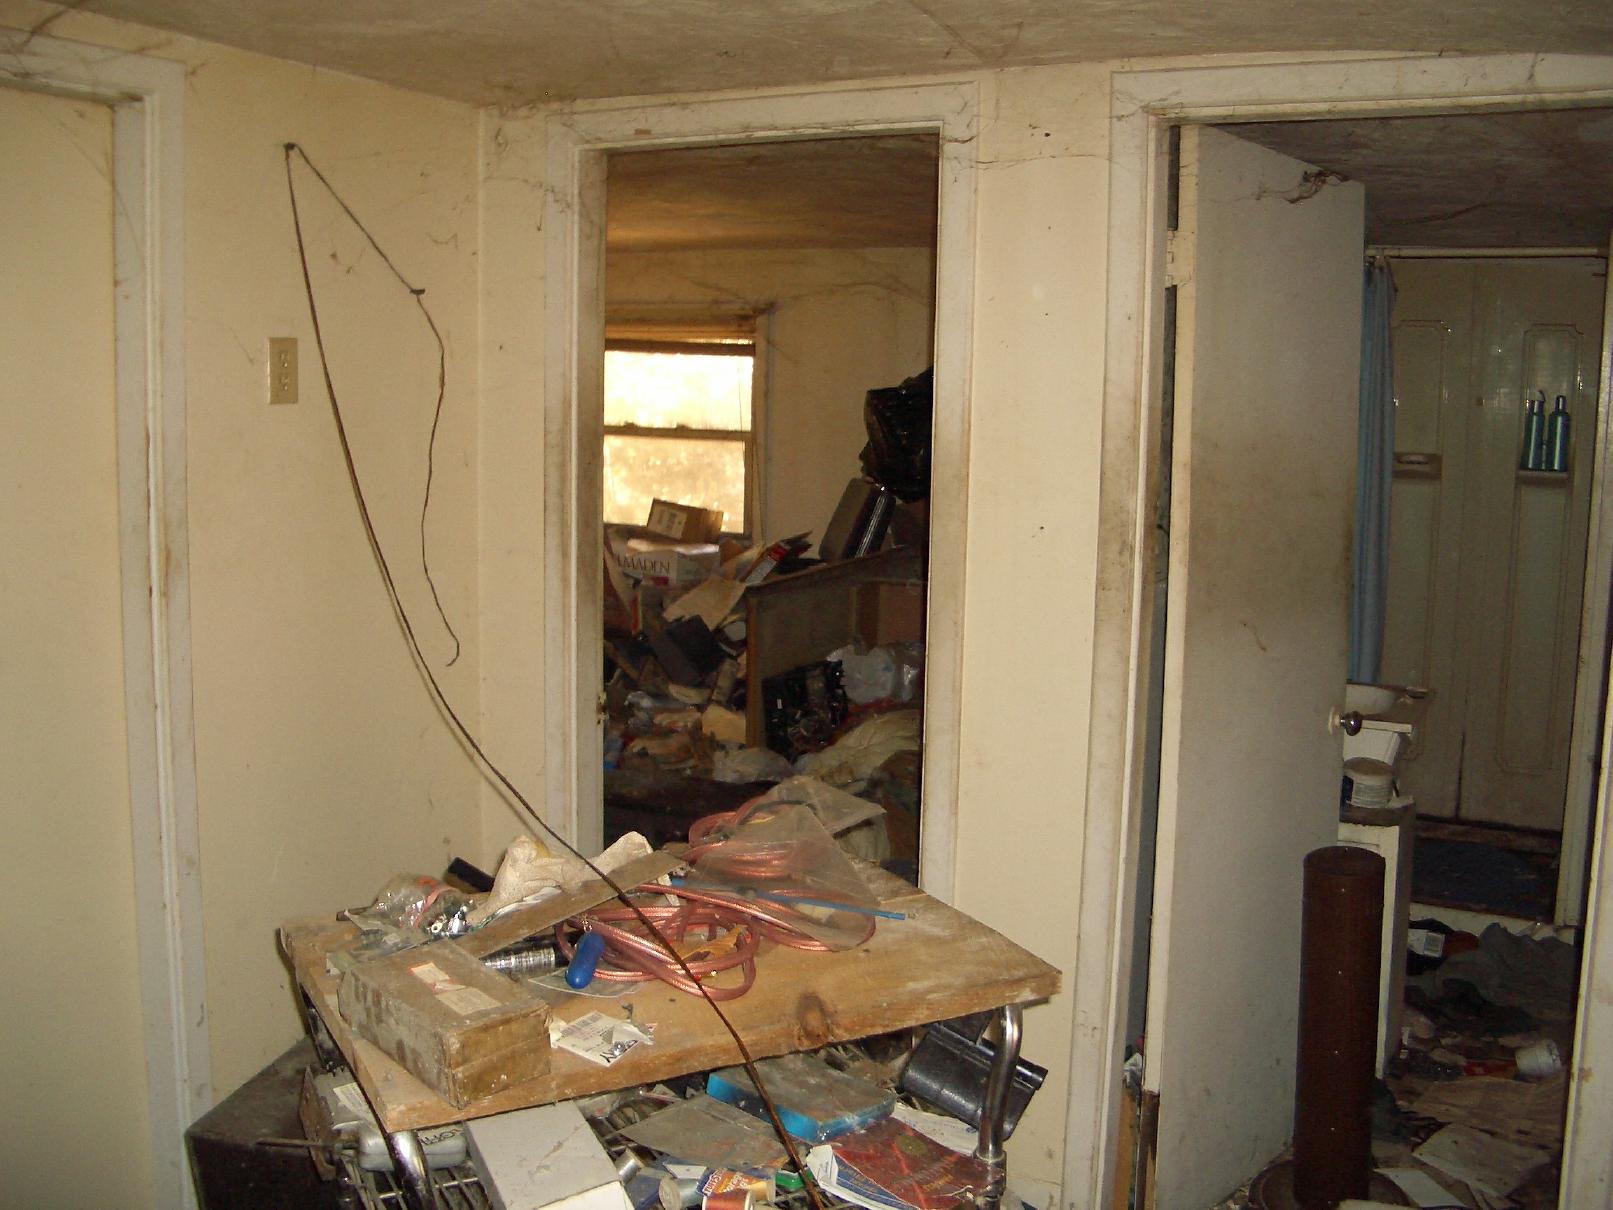 trashed rooms